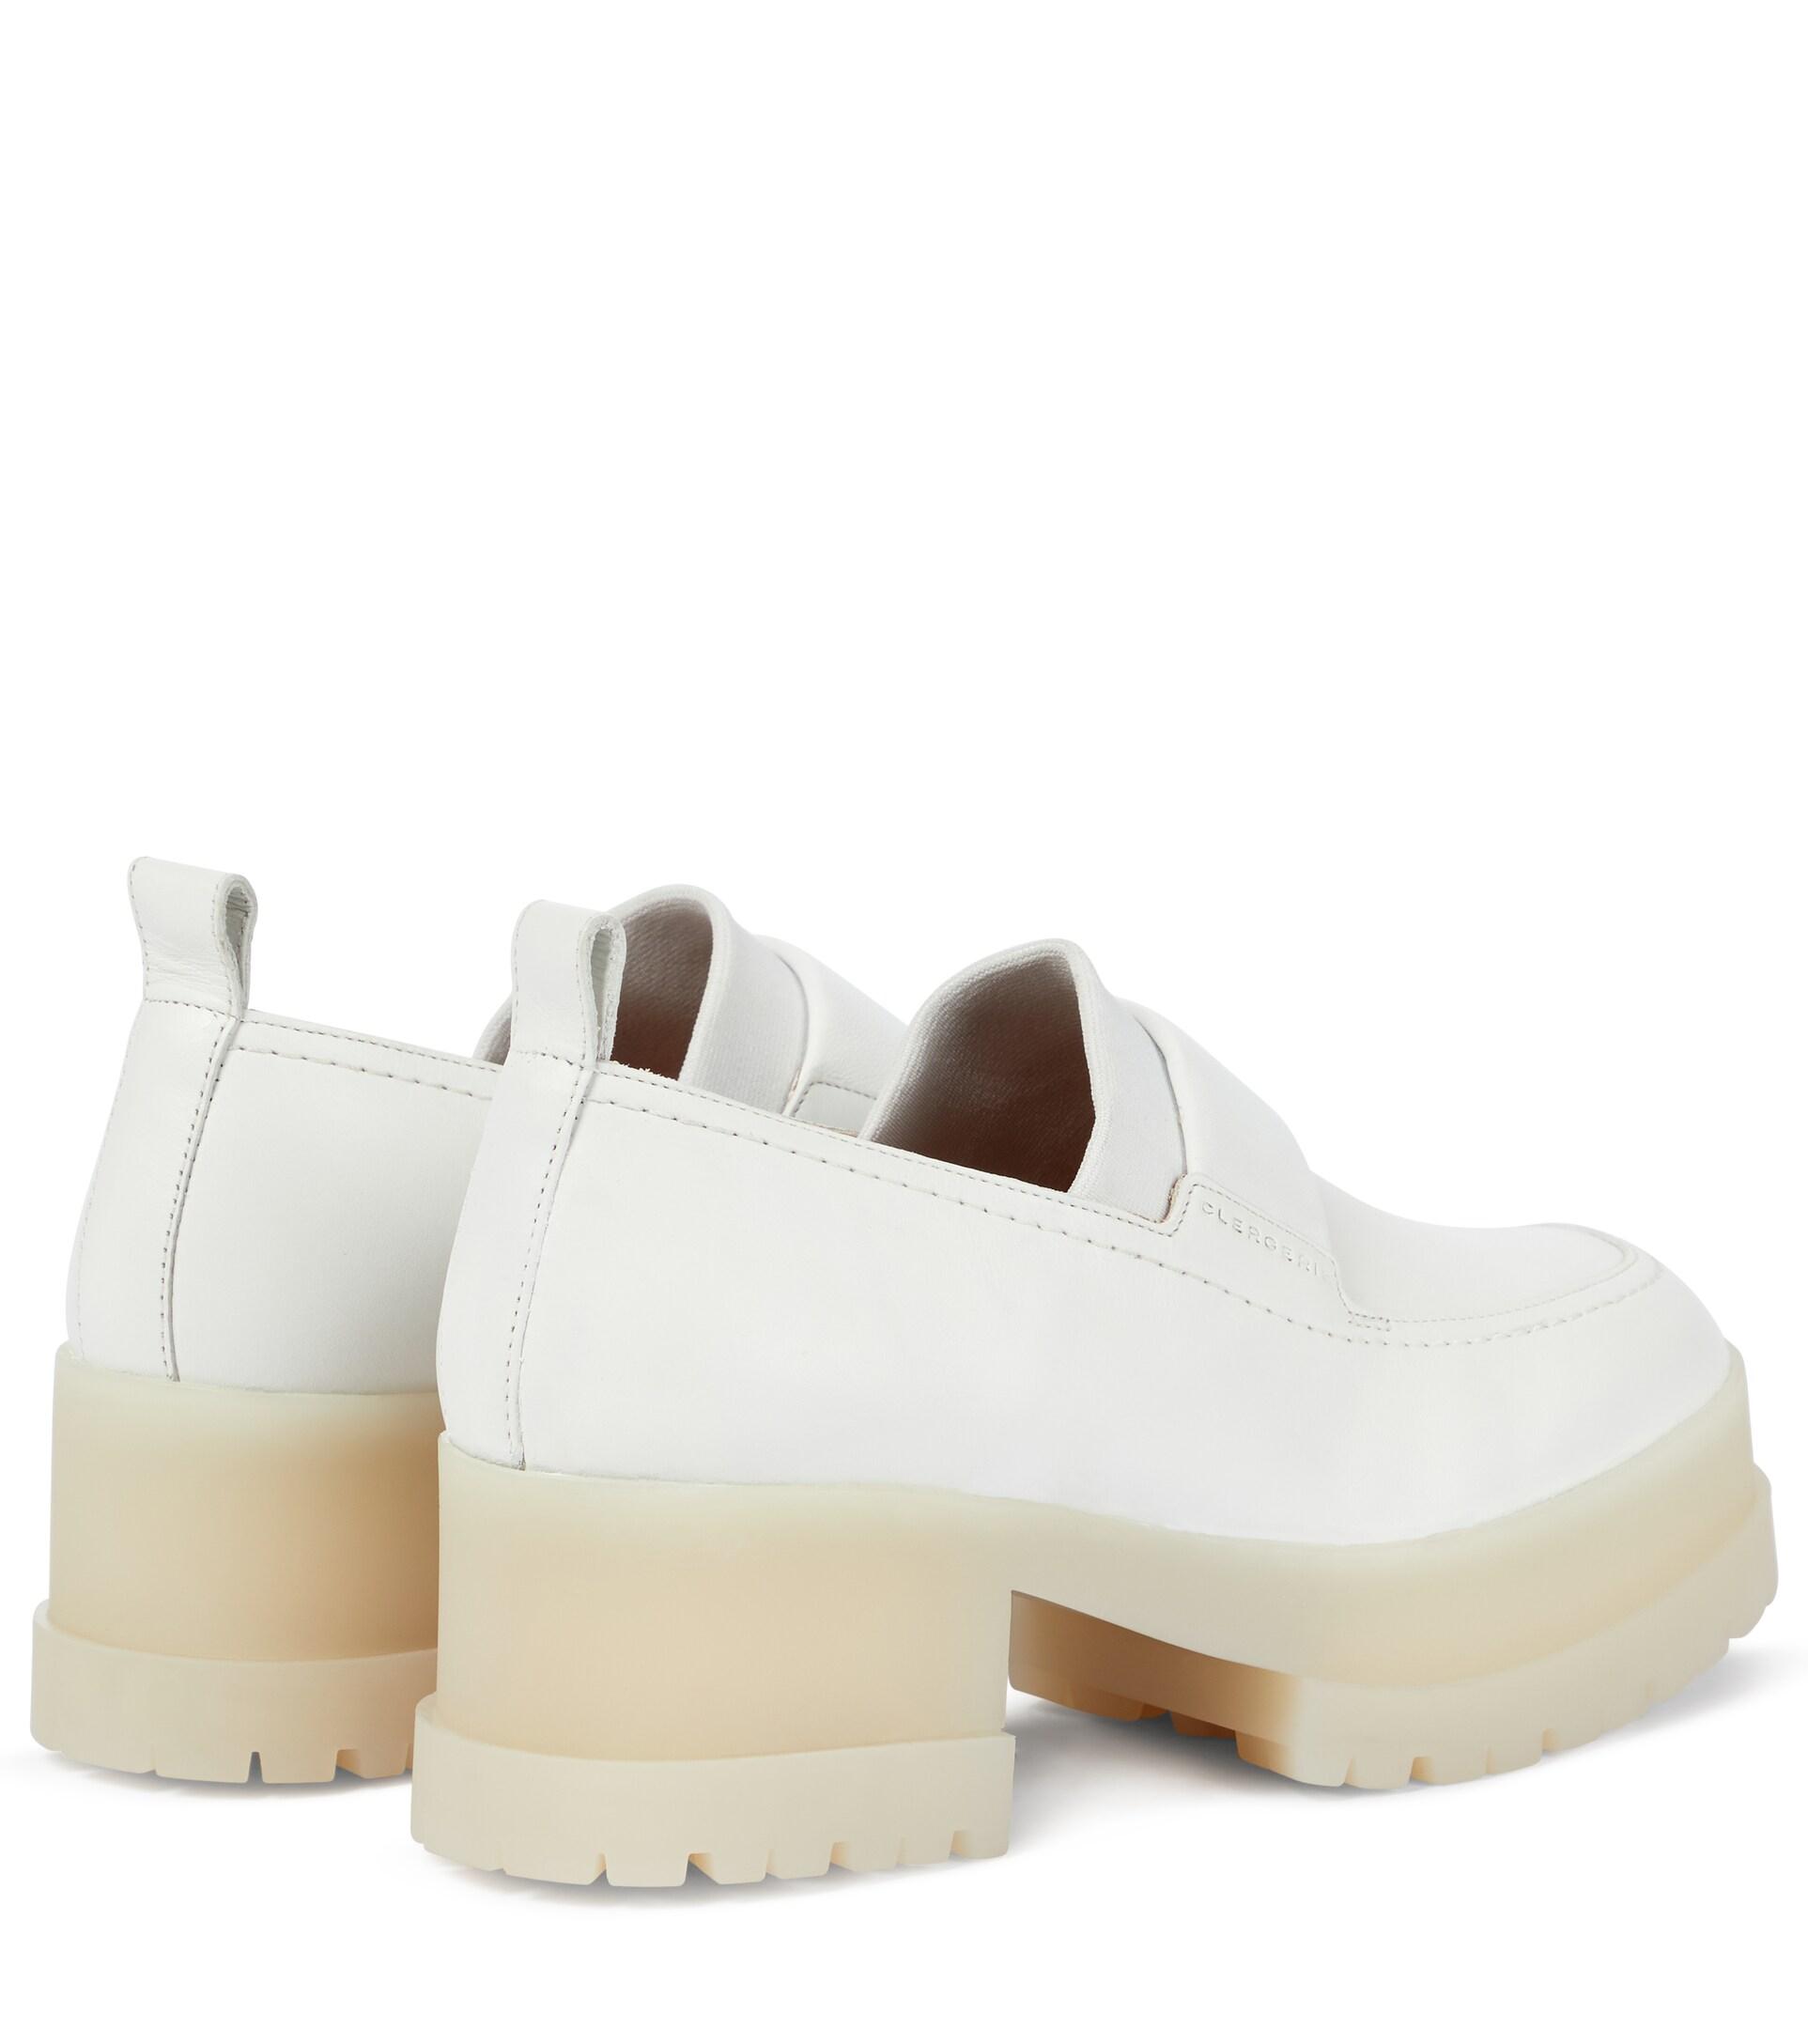 Robert Clergerie Waelly Platform Leather Loafers in White | Lyst